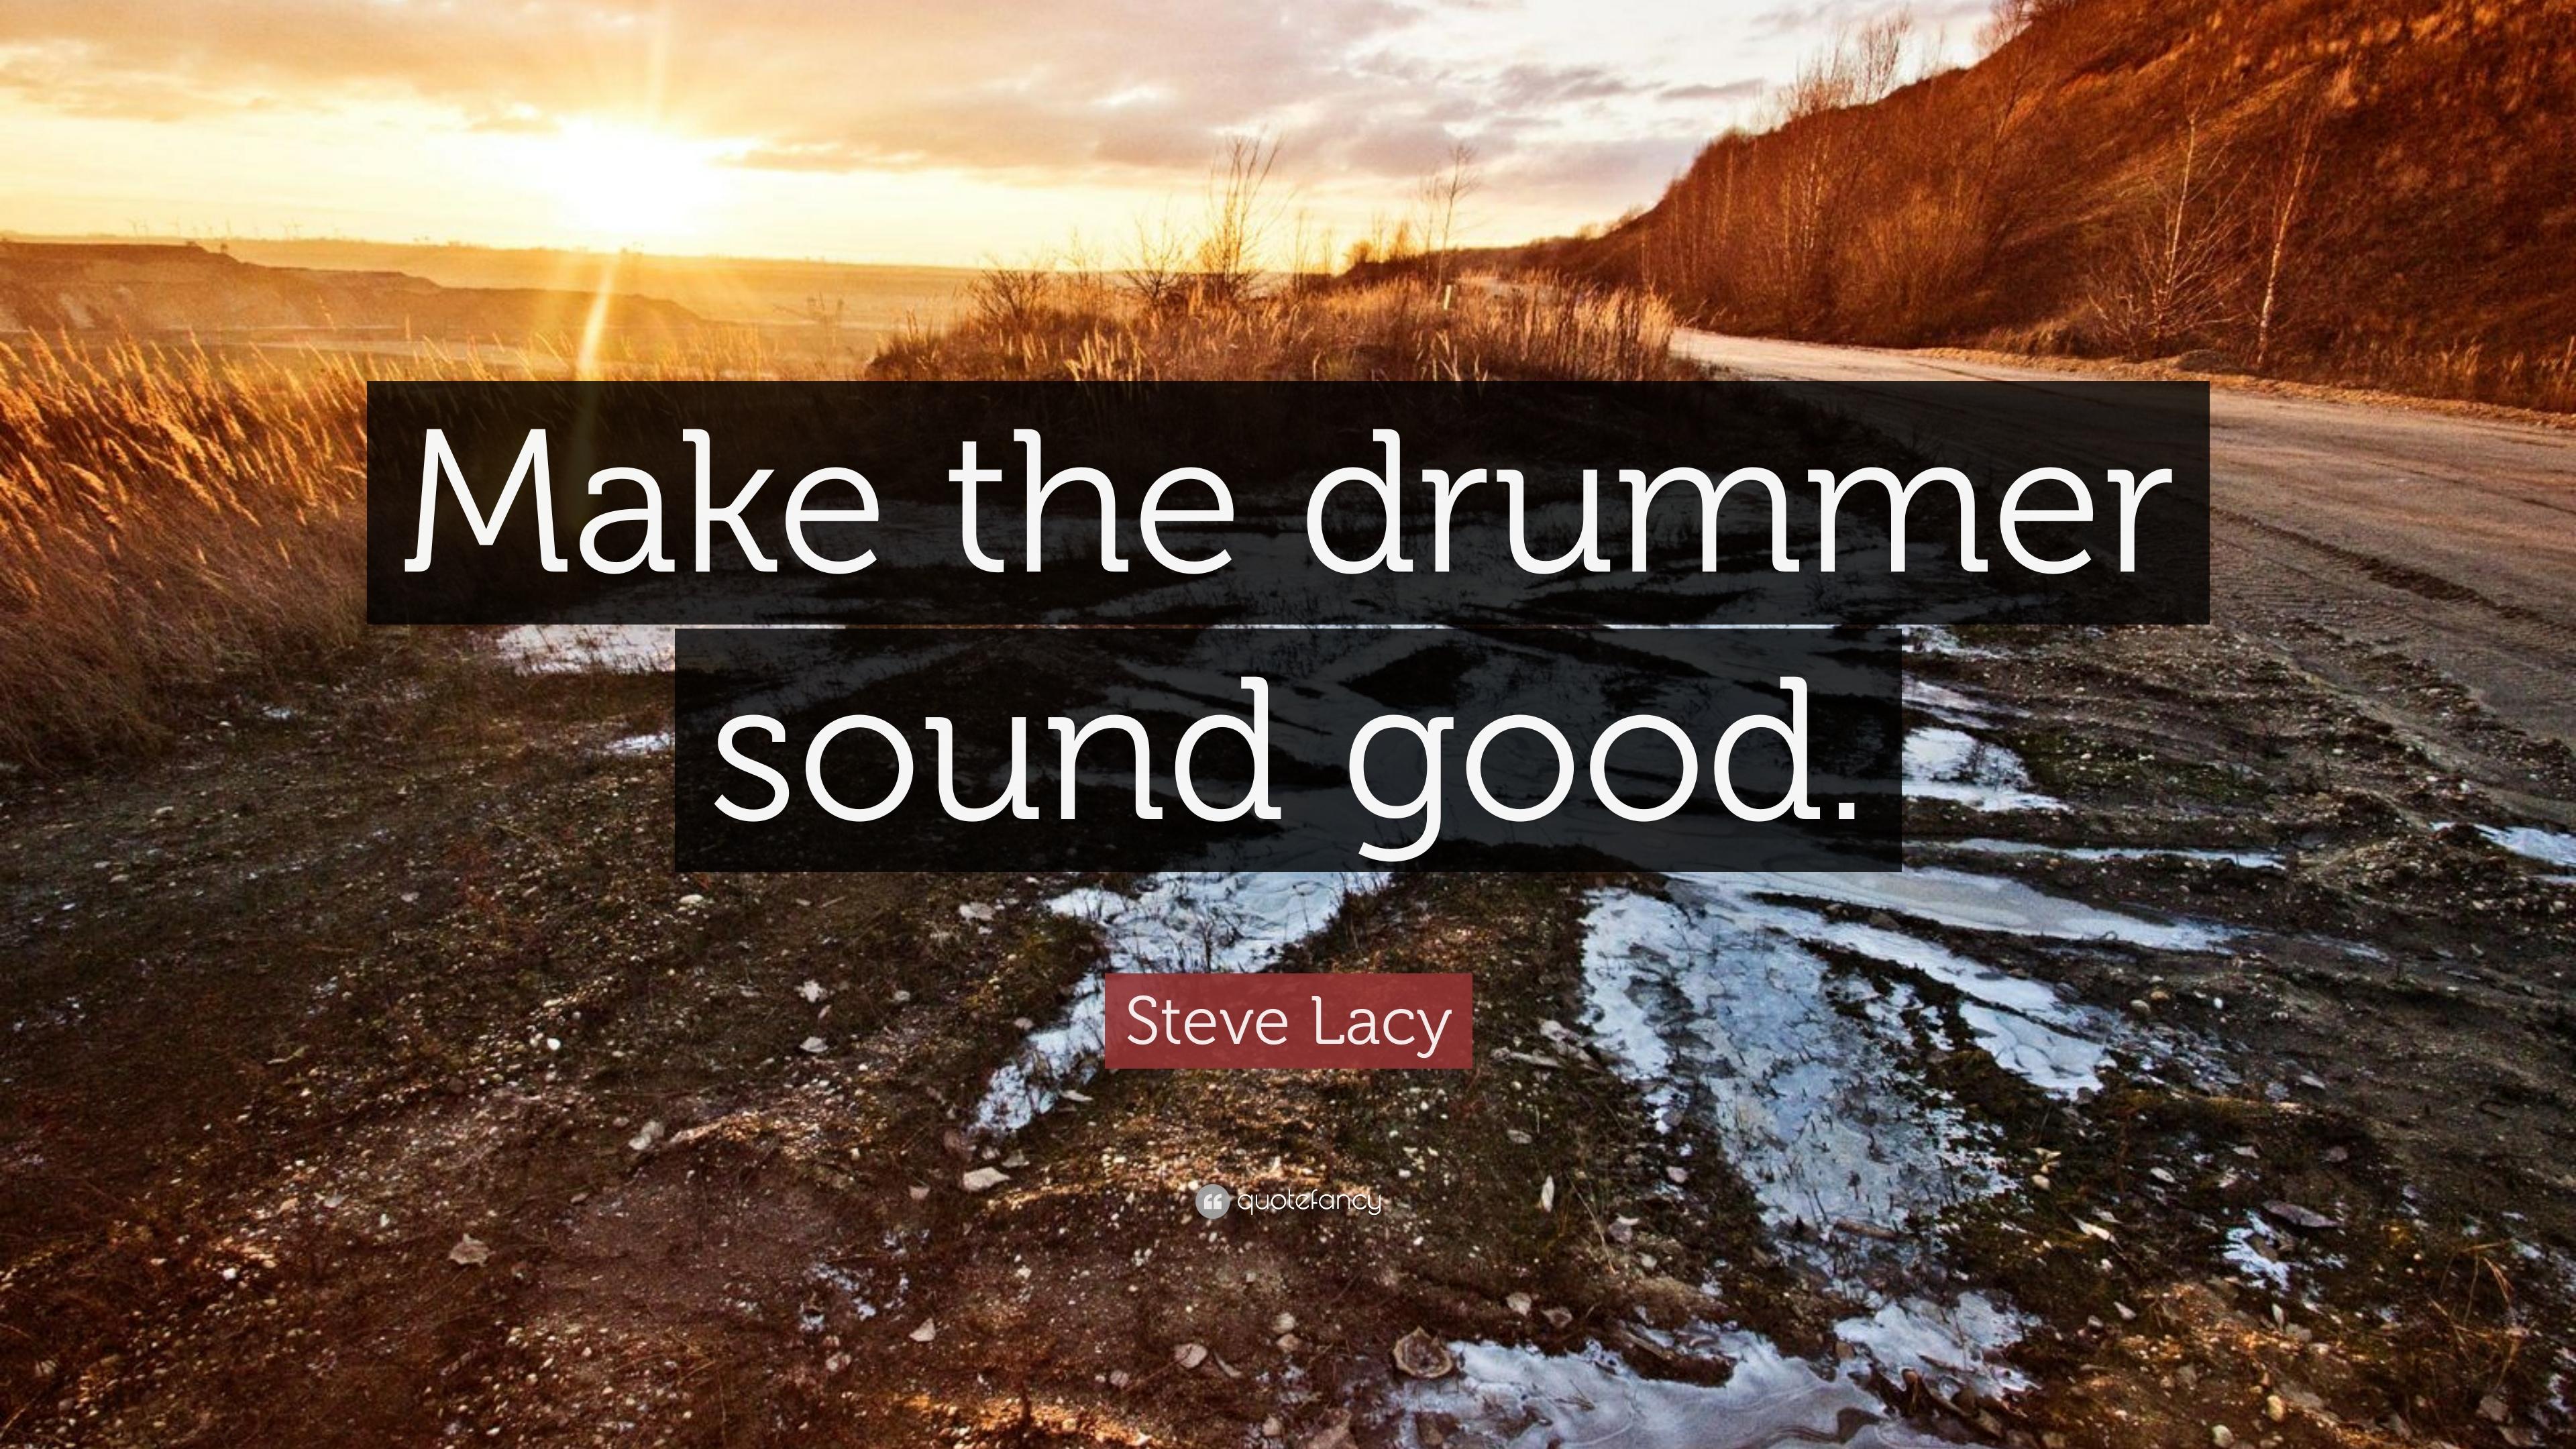 Steve Lacy Quote: “Make the drummer sound good.” 7 wallpaper